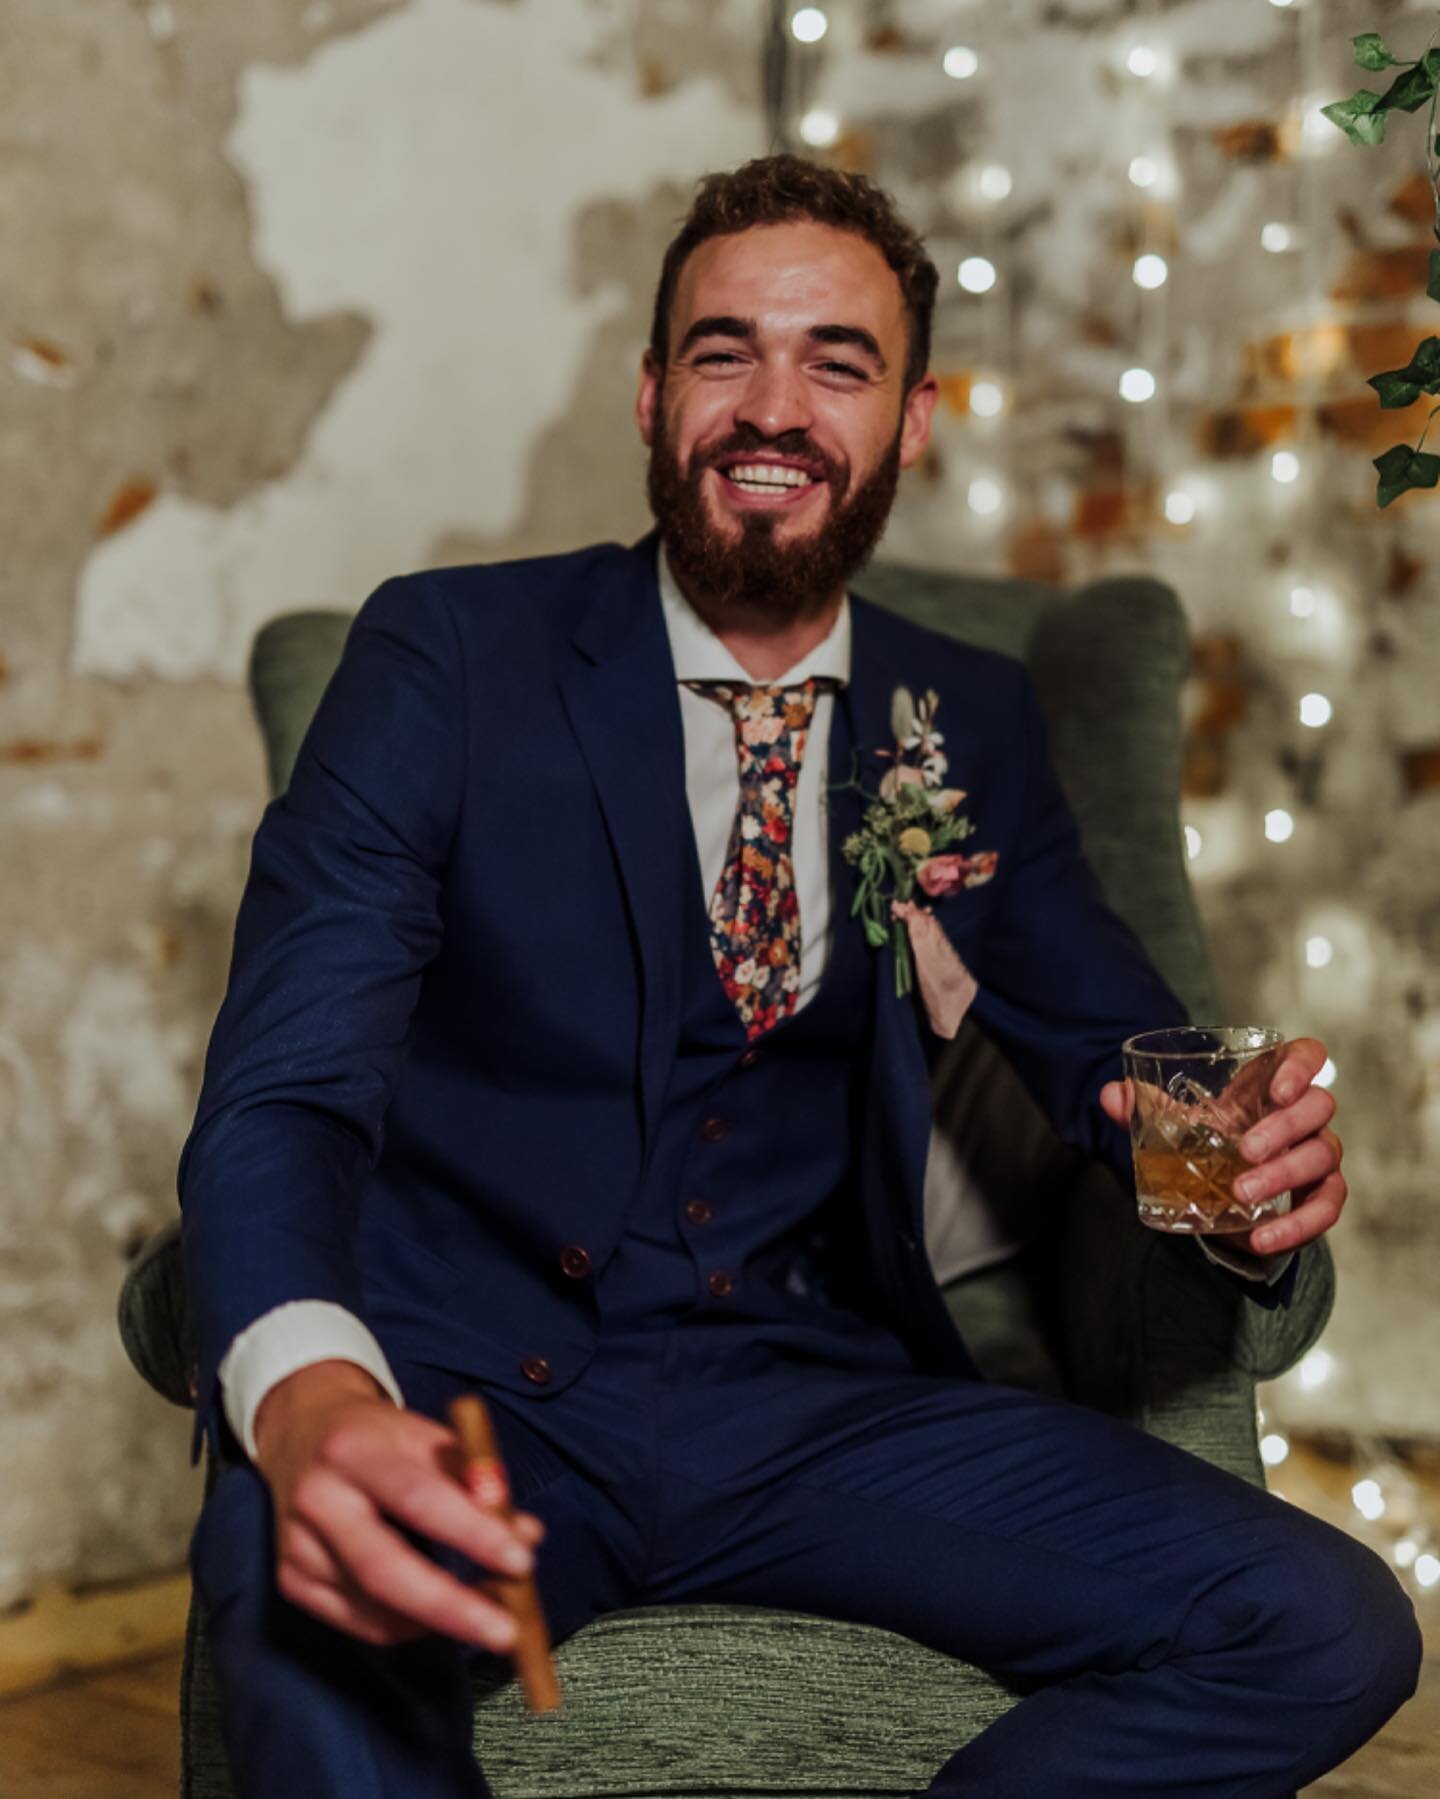 Cheers to the Bank Holiday weekend 🥃 
Sneak peek from our shoot @woolasbarn with the uber cool pop up bar in the eaves ✨

Photography - @photosarahbeth
Venue - @woolasbarn
Planning &amp; Styling - @emilykweddings
Floral Design - @daisyhobanflorist
S